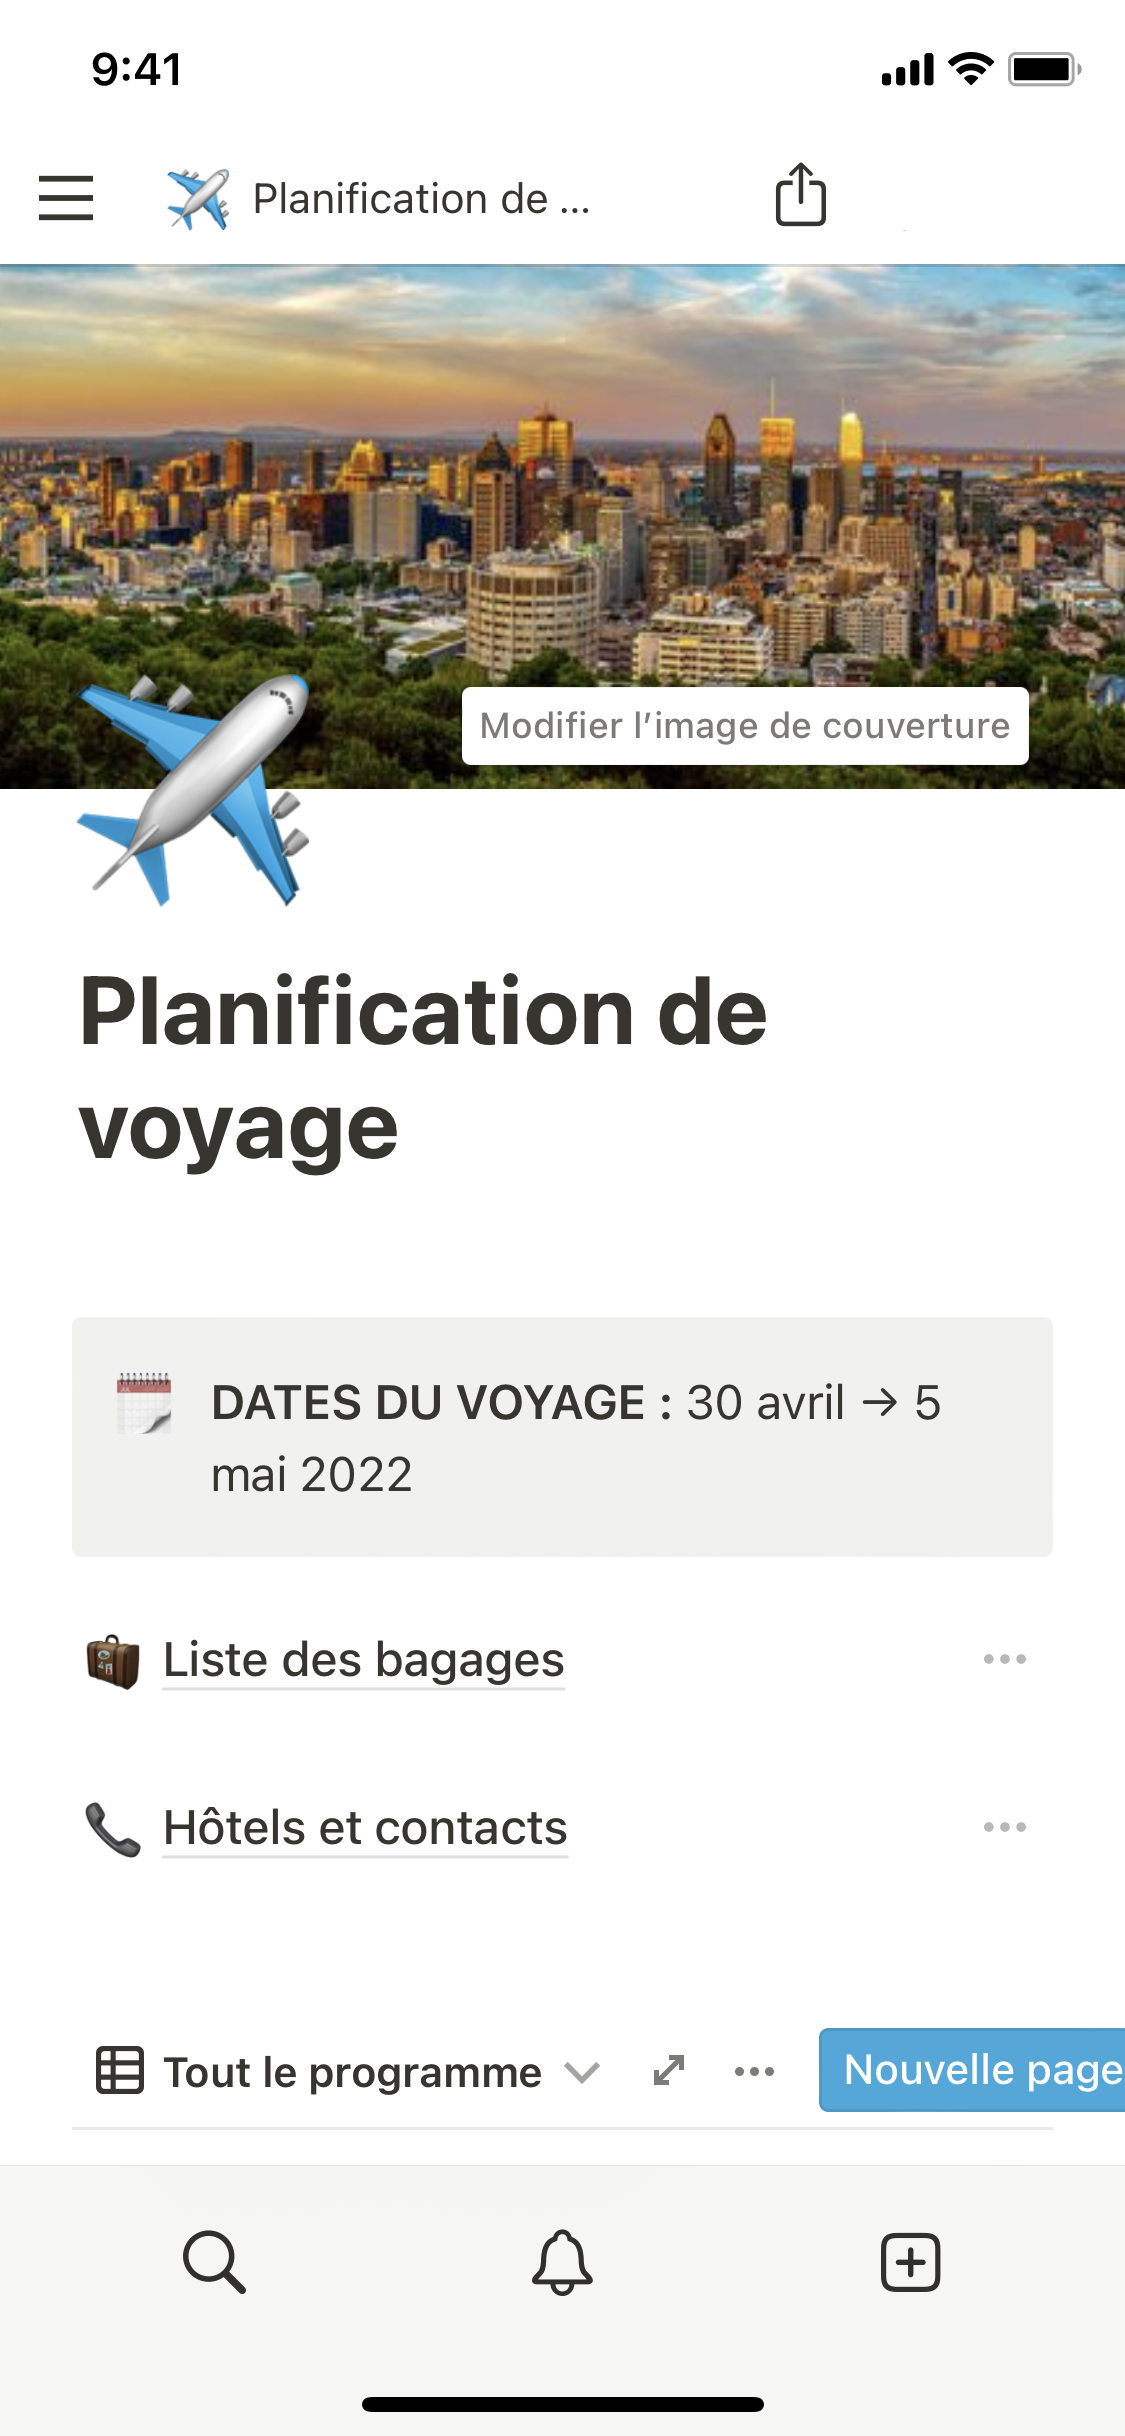 The mobile image for the Travel planning template